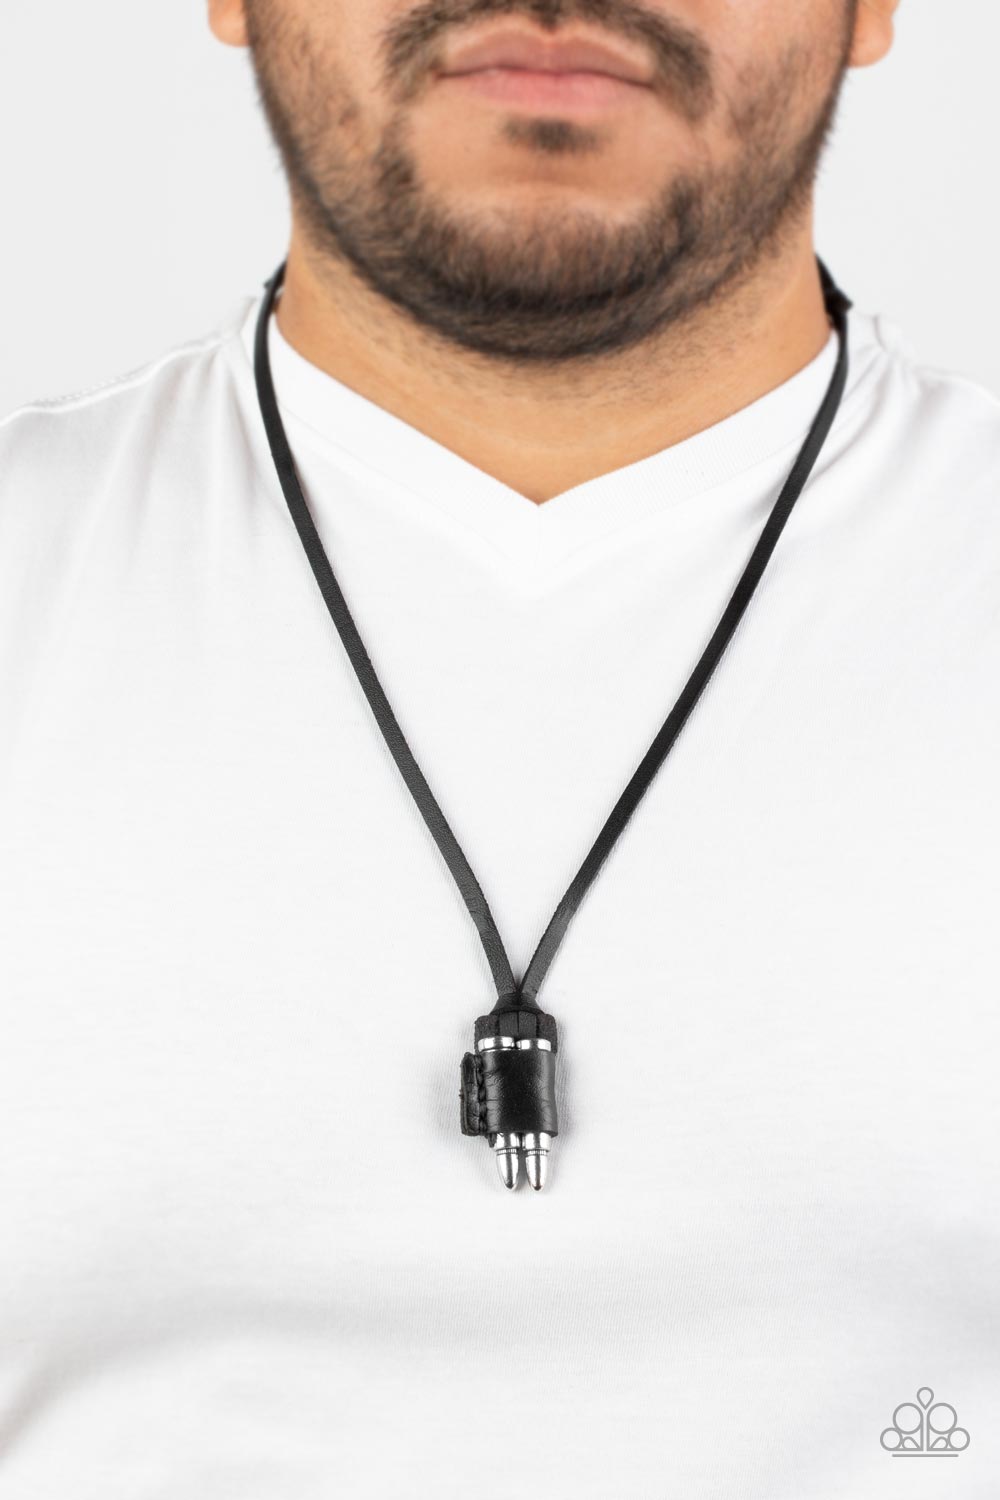 On the Lookout Black Necklace Paparazzi Accessories. #P2UR-BKXX-185XX. Get Free Shipping. $5 Urban